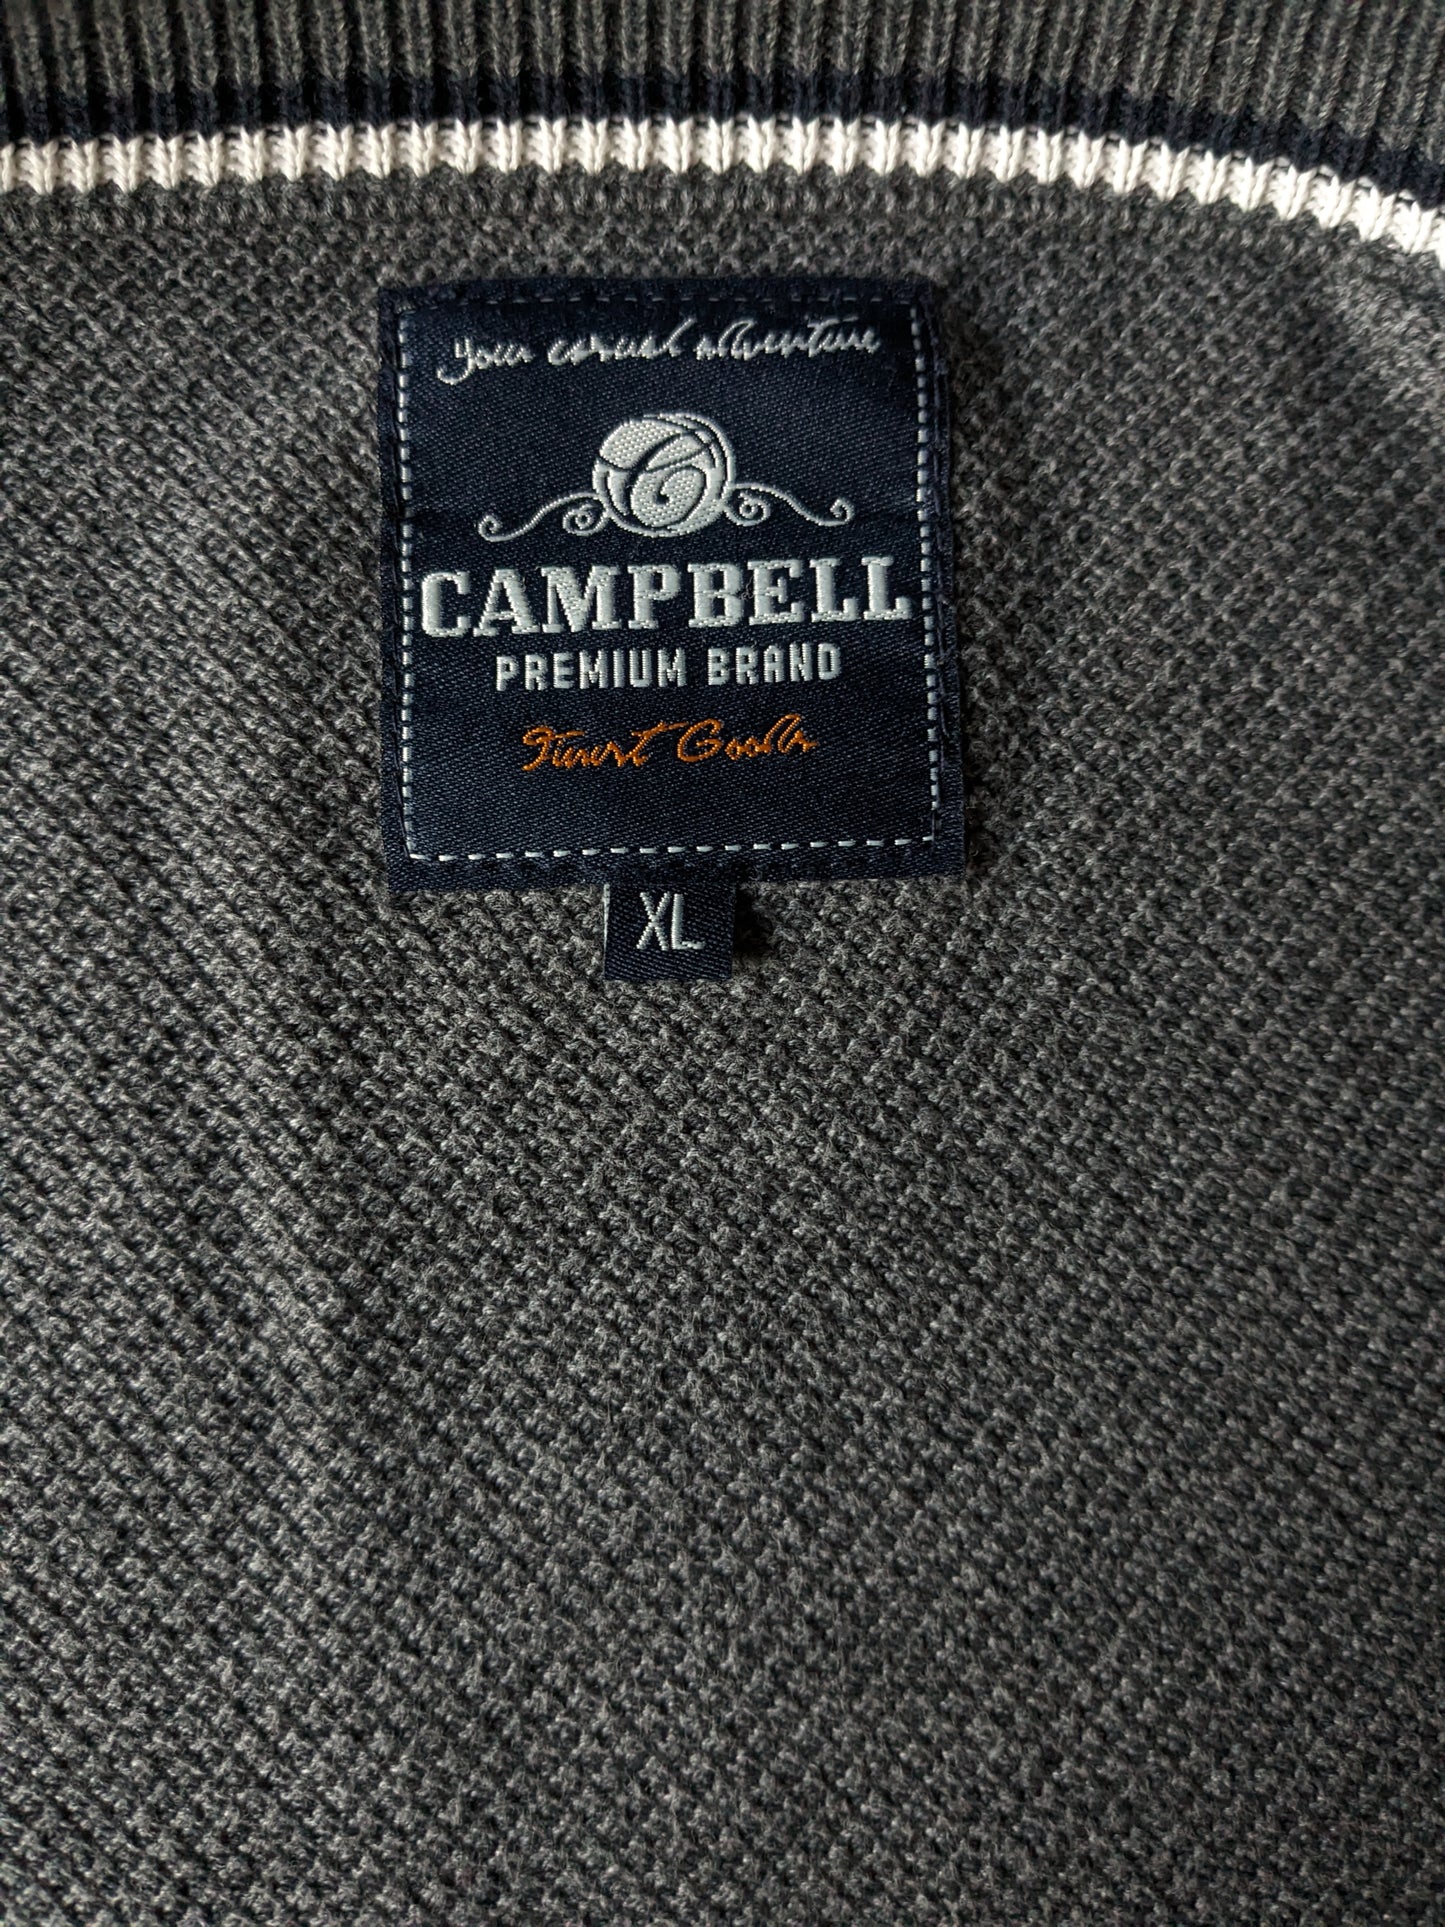 Chaleco Campbell. Color gris oscuro. Tamaño xl.